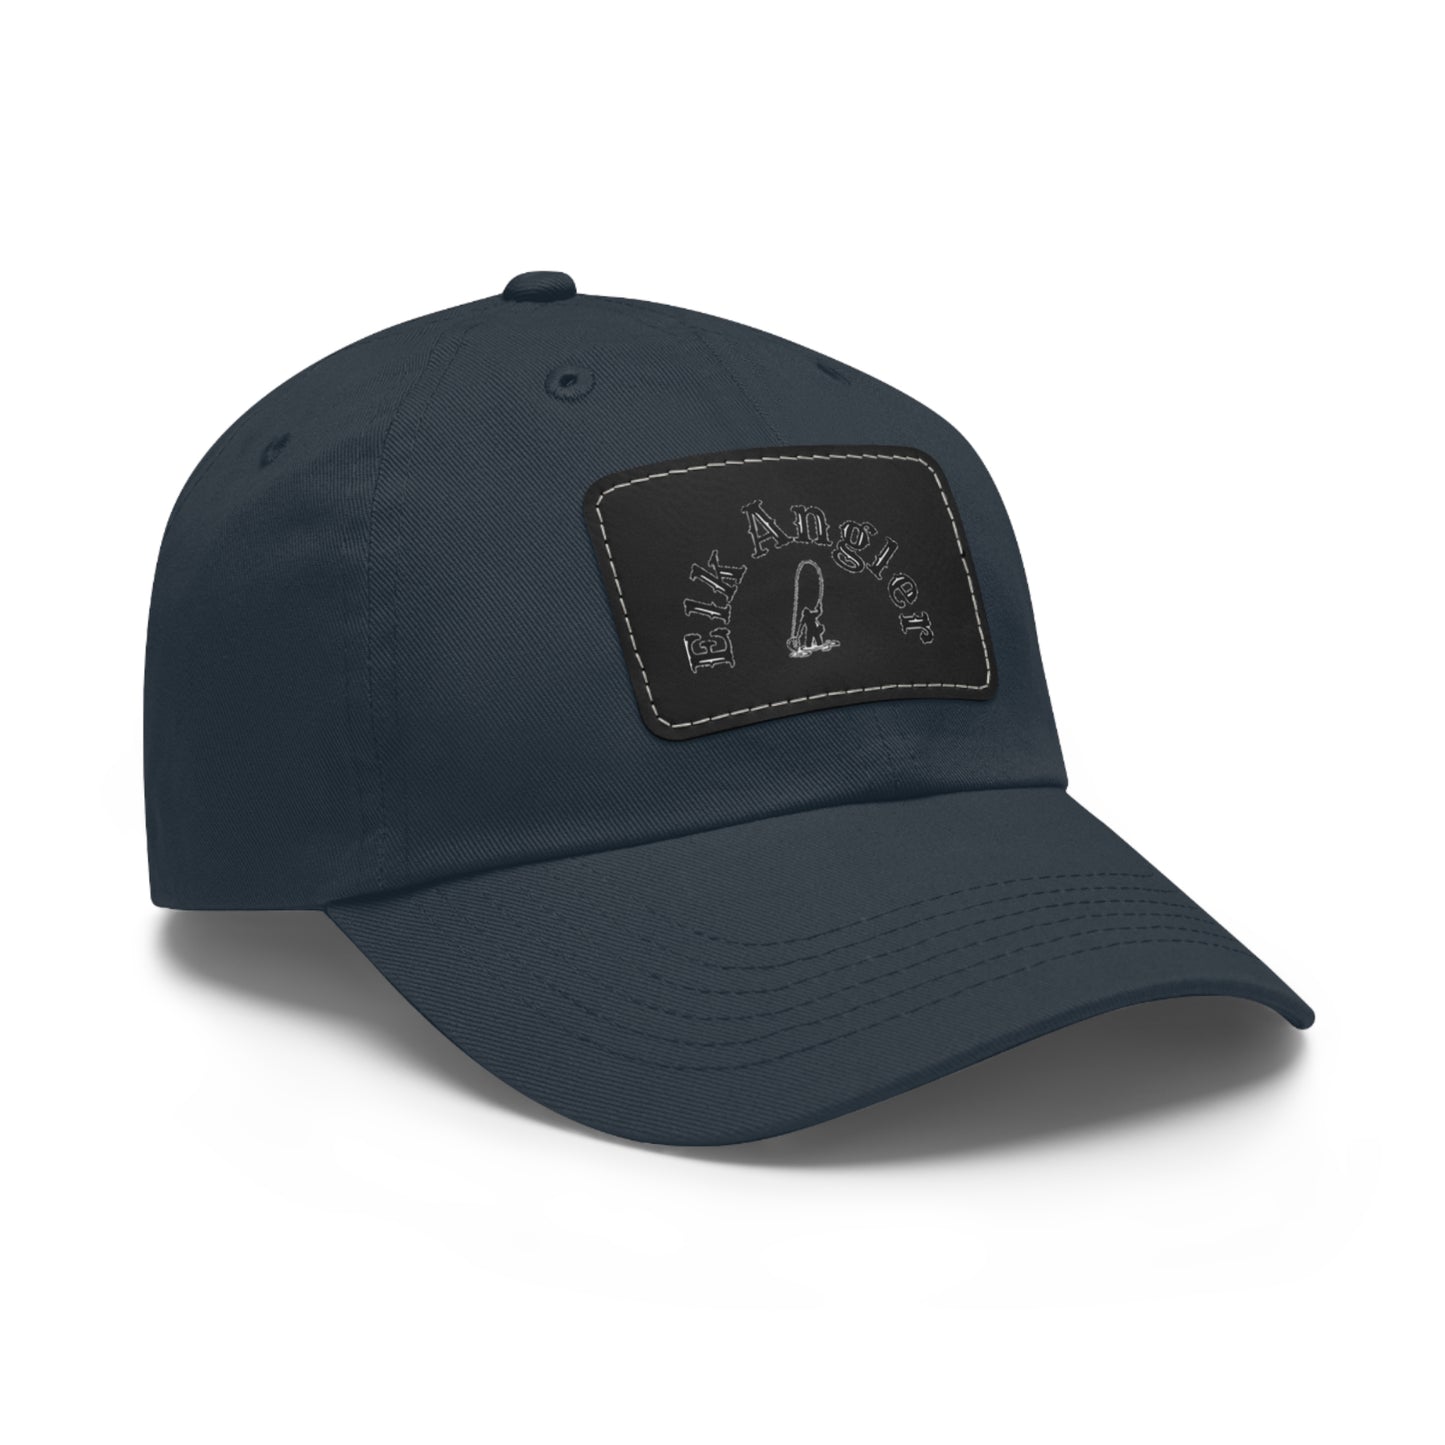 Elk Angler Hat with Leather Patch (Rectangle)